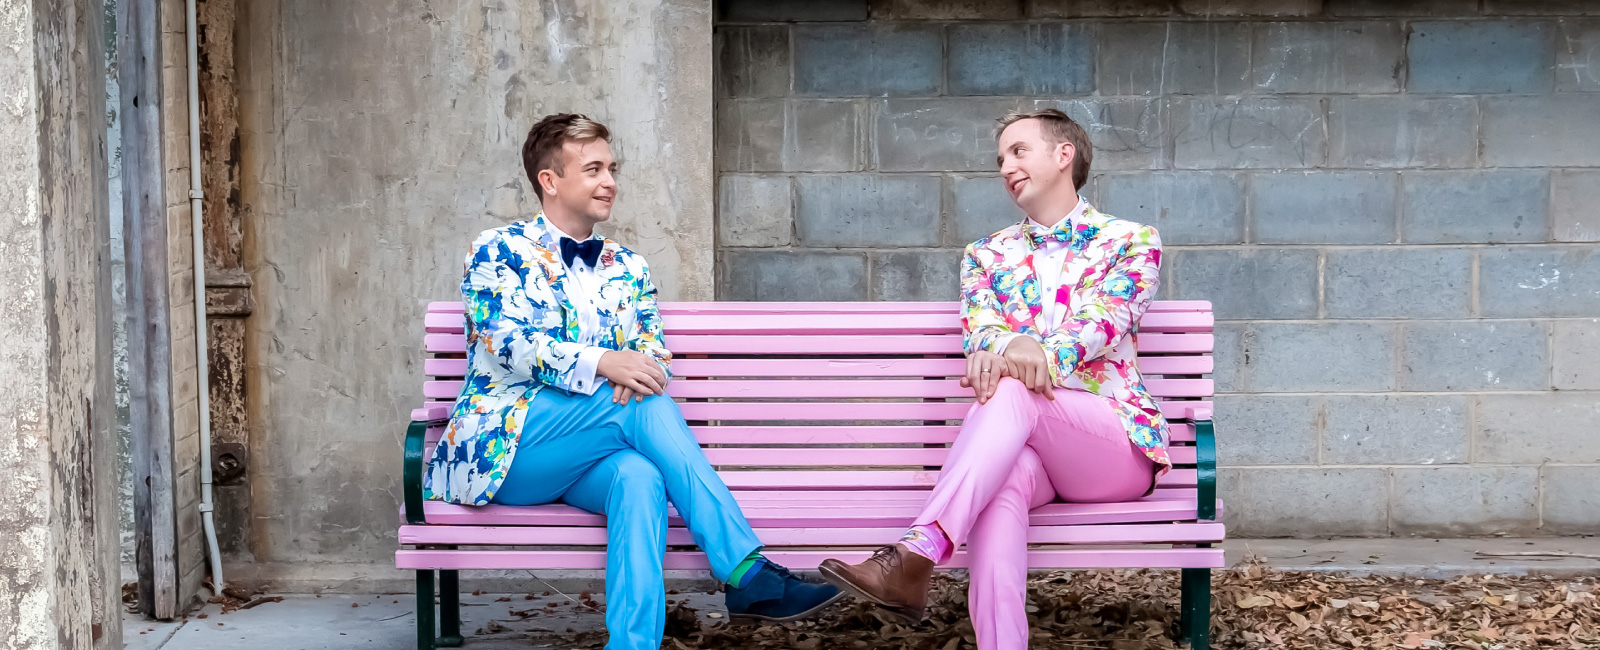 Ben (left) and husband, Jack (right) sitting on pink bench